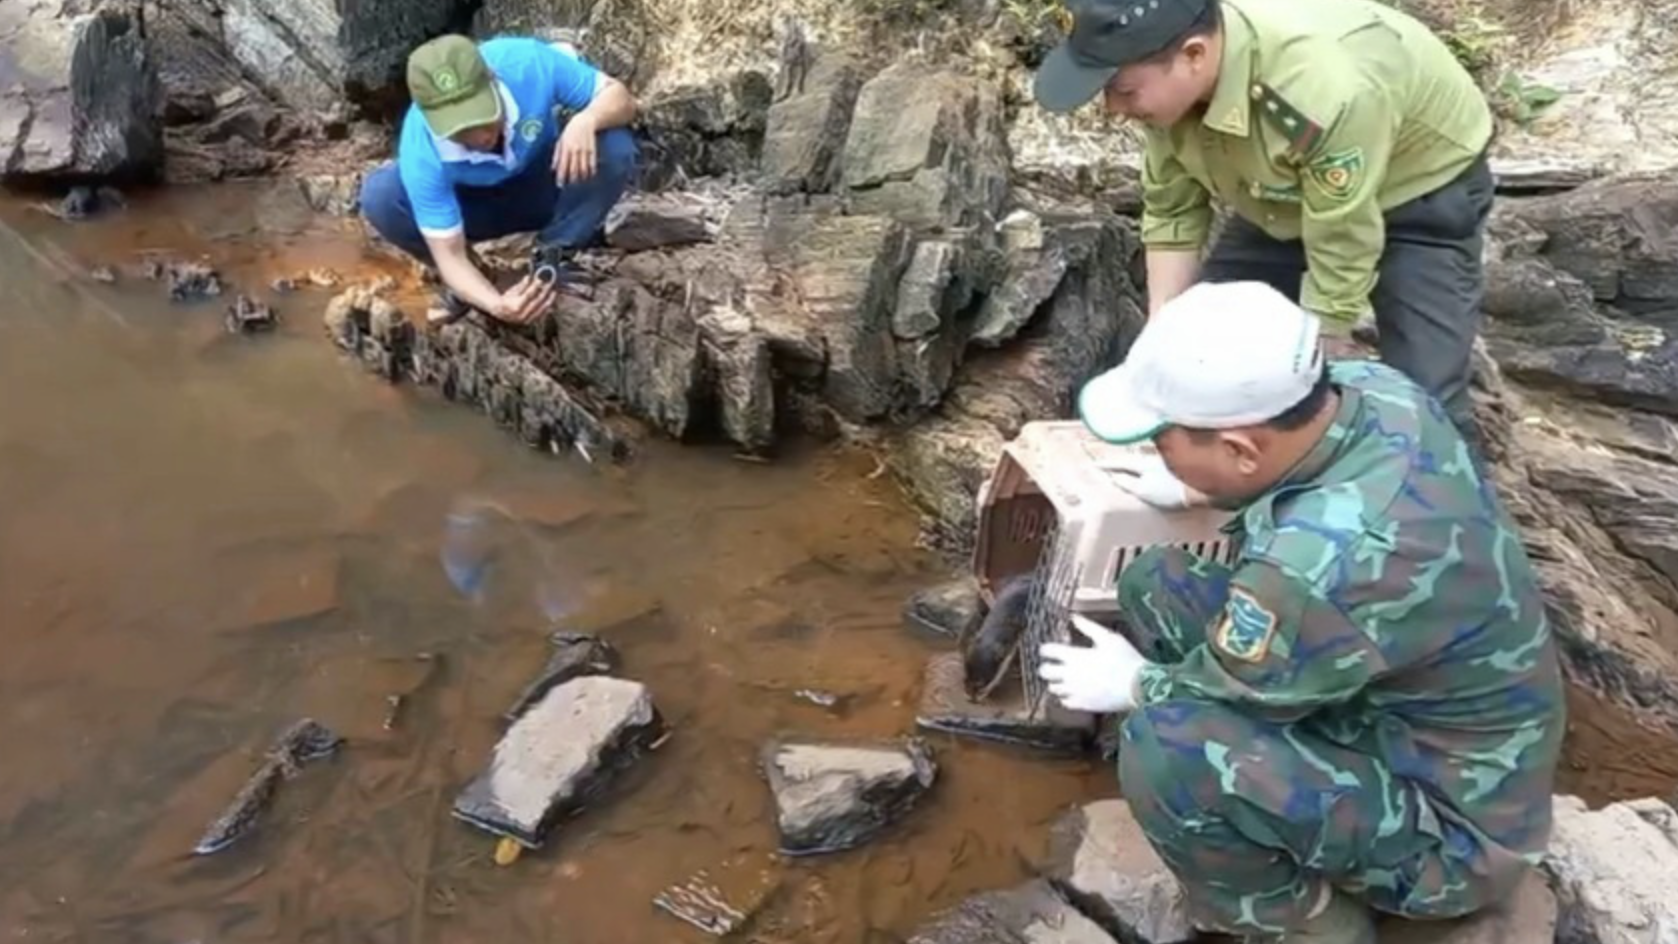 49 wild animals released back to nature in southern Vietnam